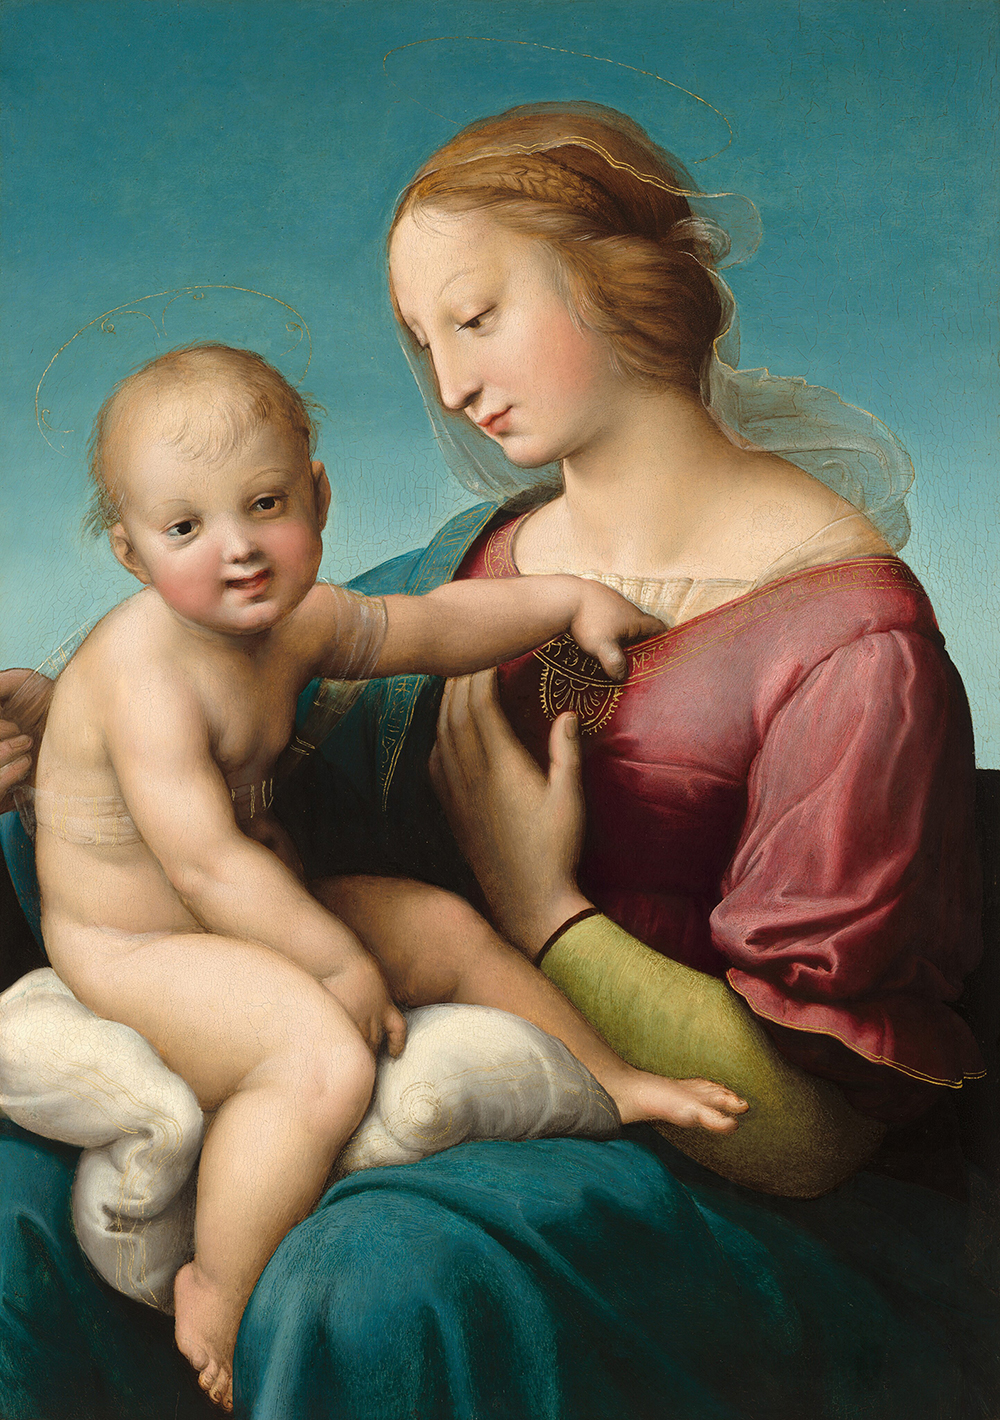 A woman holds and looks toward a nude, young child, who sits on her lap and looks out at us, smiling, in this vertical painting.